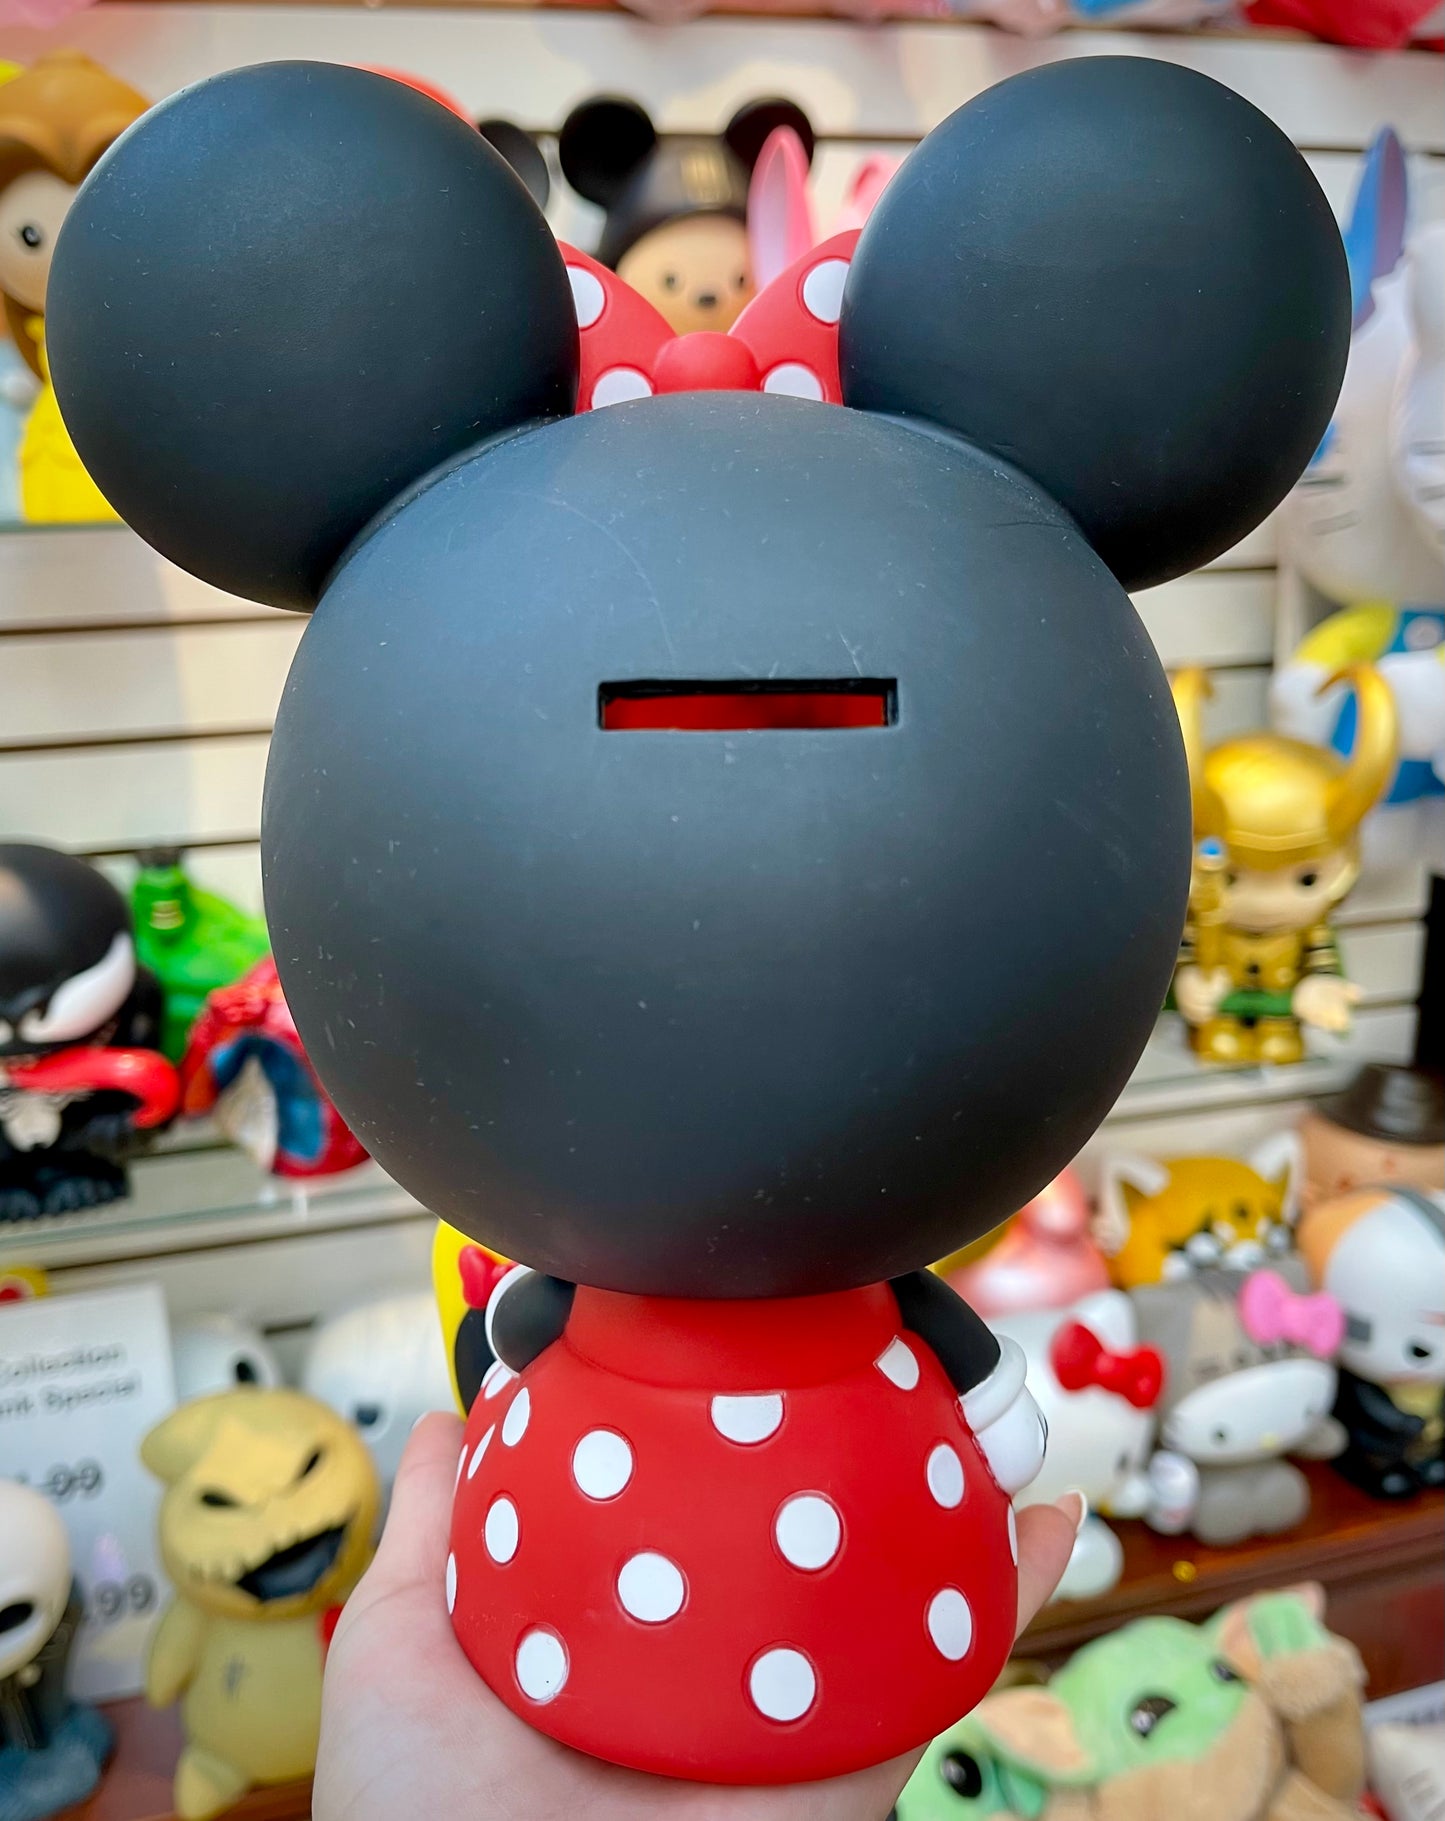 Minnie Mouse Bank